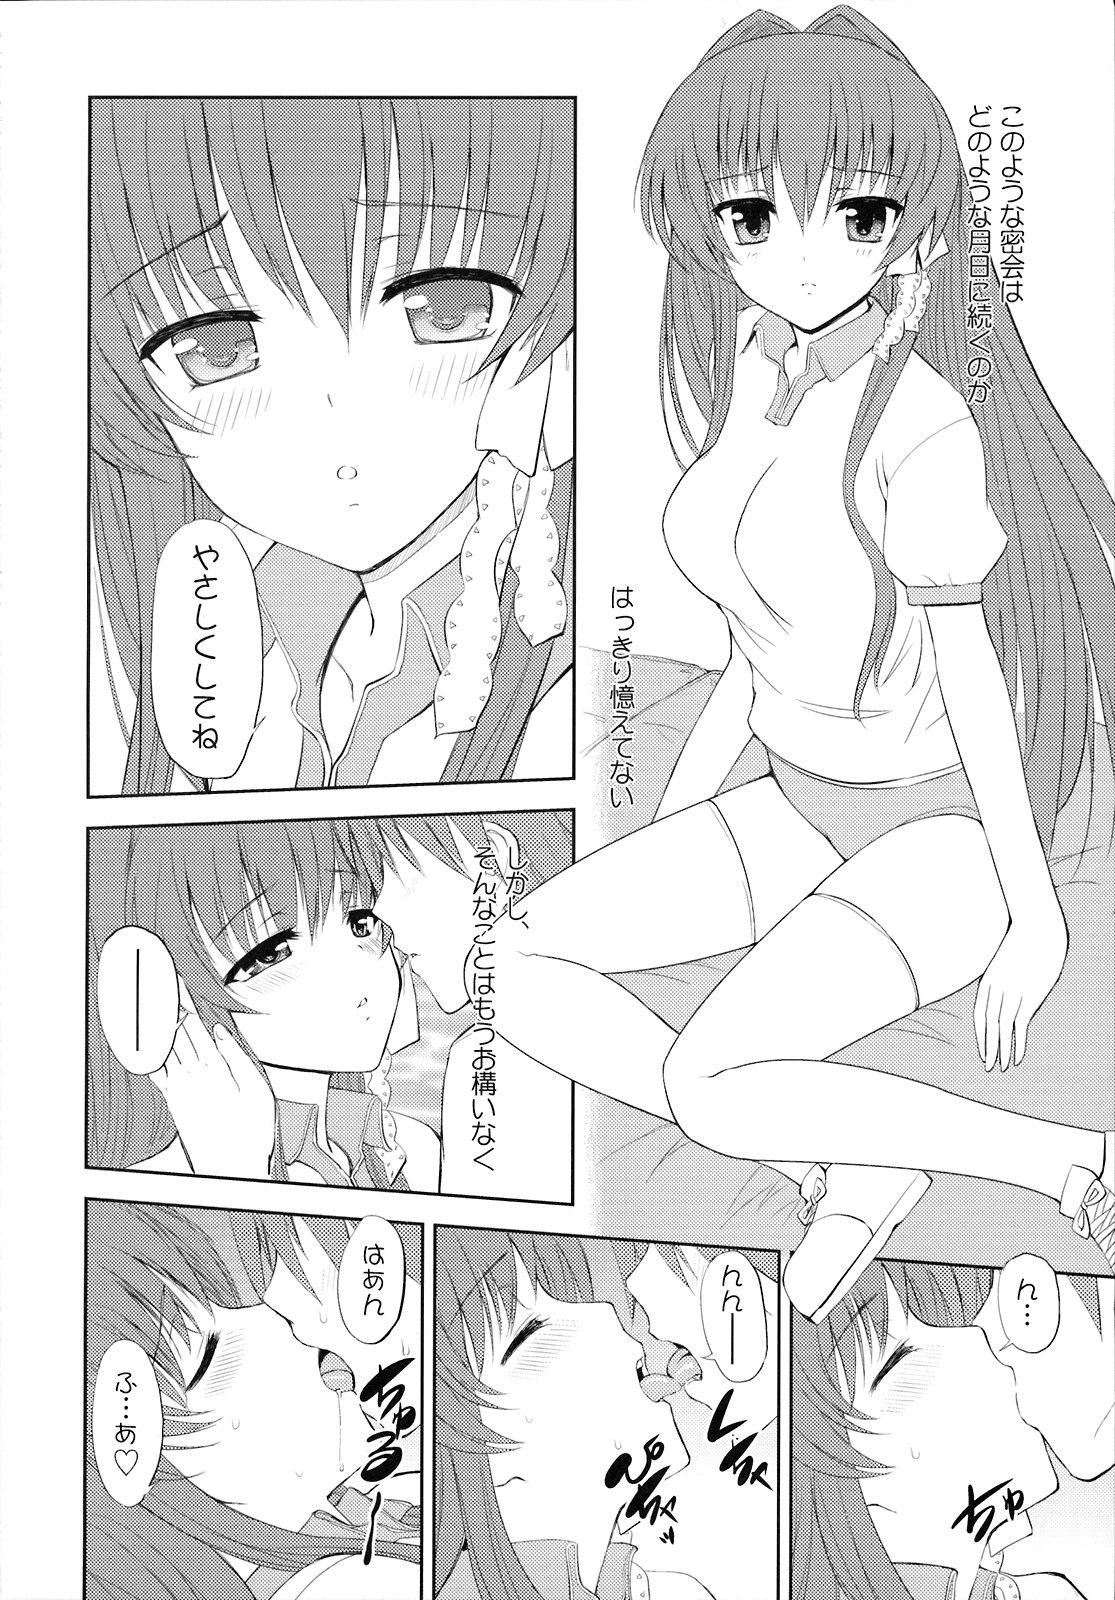 Stunning KYOU MANIA - Clannad Teenpussy - Page 5